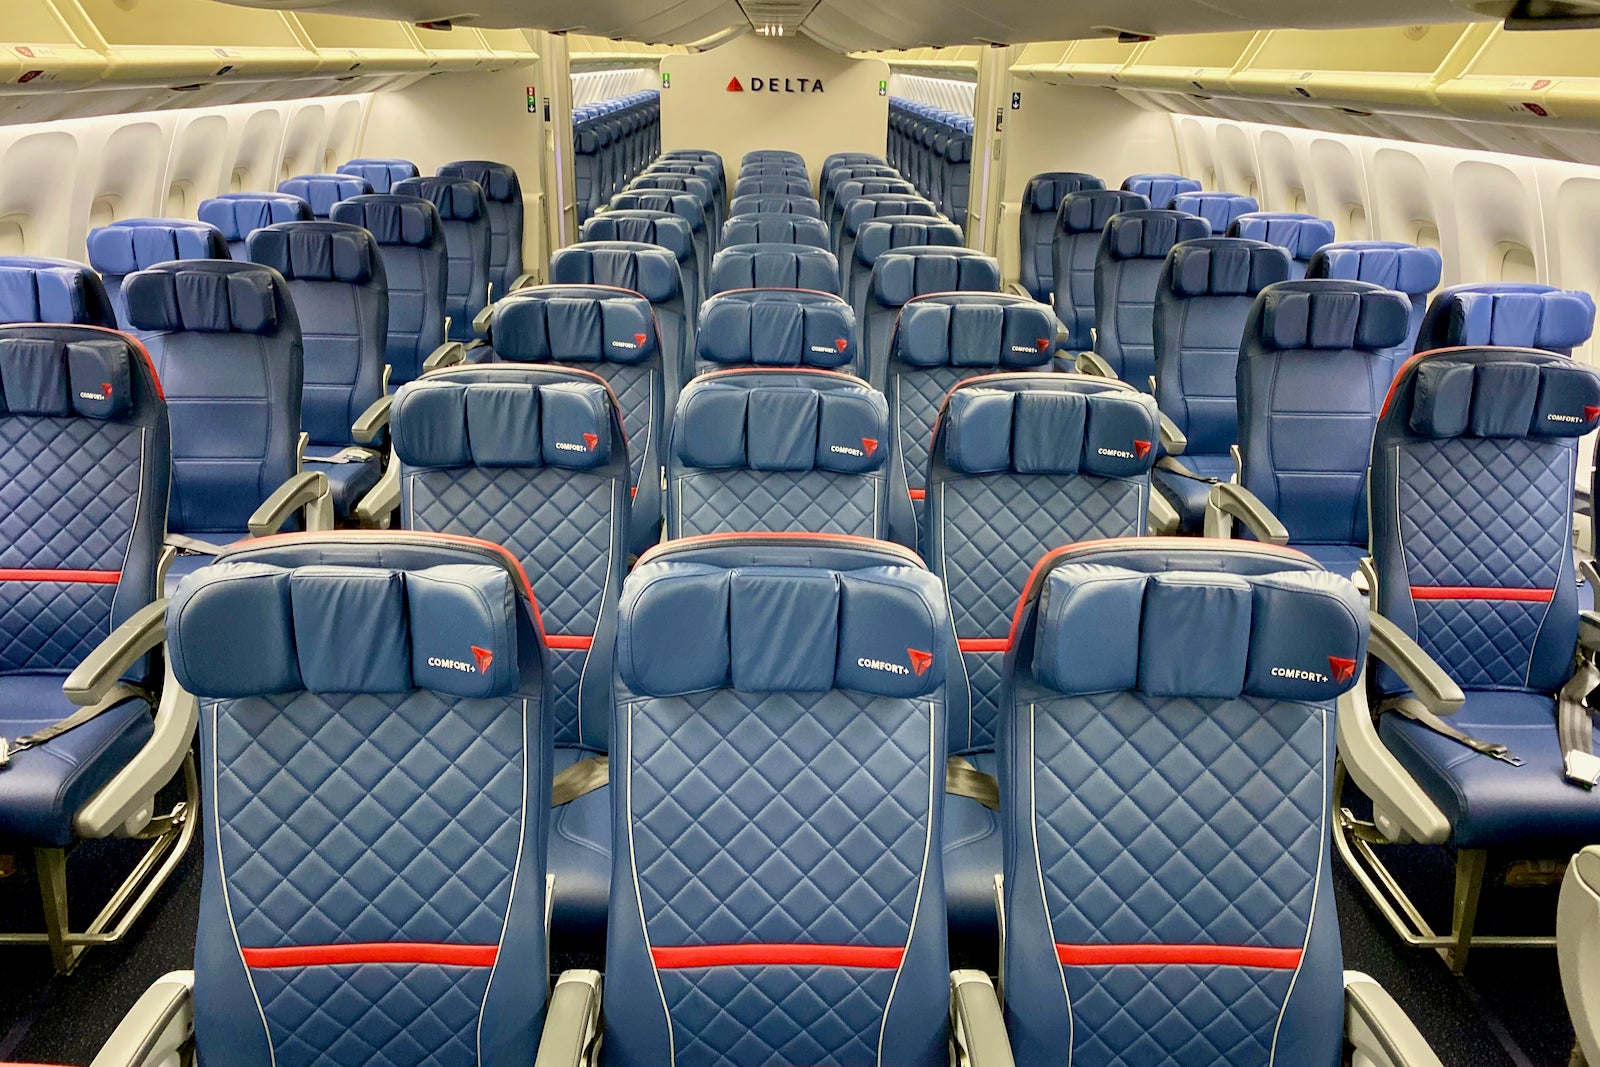 Pods, lie-flat seats and recliners: A look at premium transcon service ...